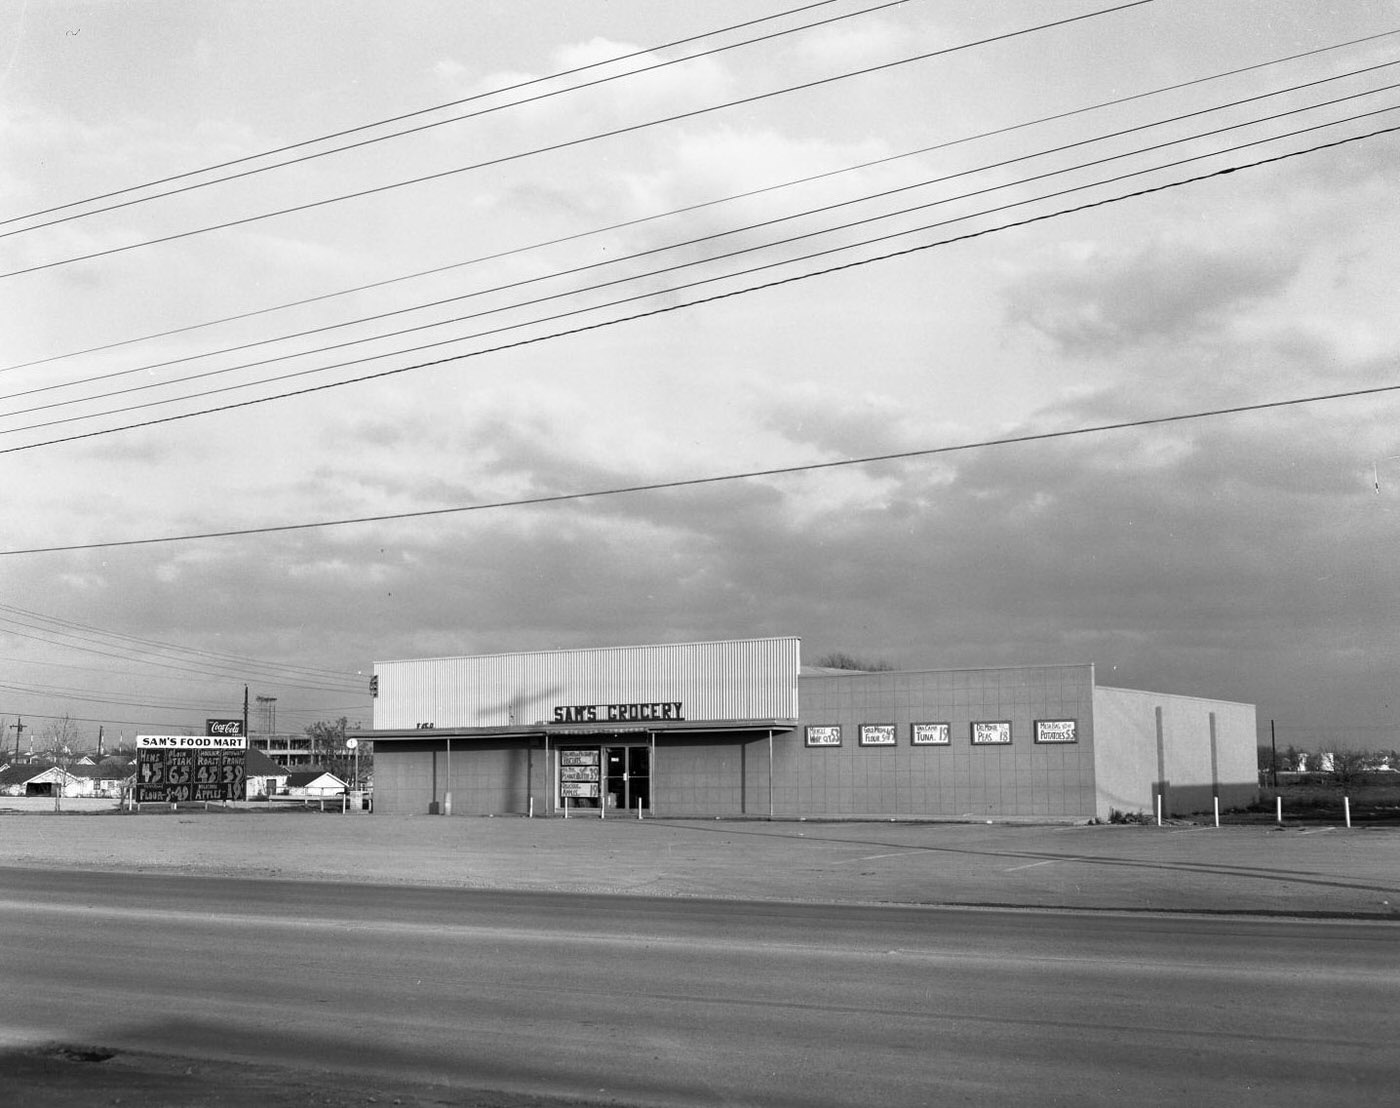 Sam's Grocery, Exterior Owned by Sam R Wood at 4805 Burnet Rd., 1957.